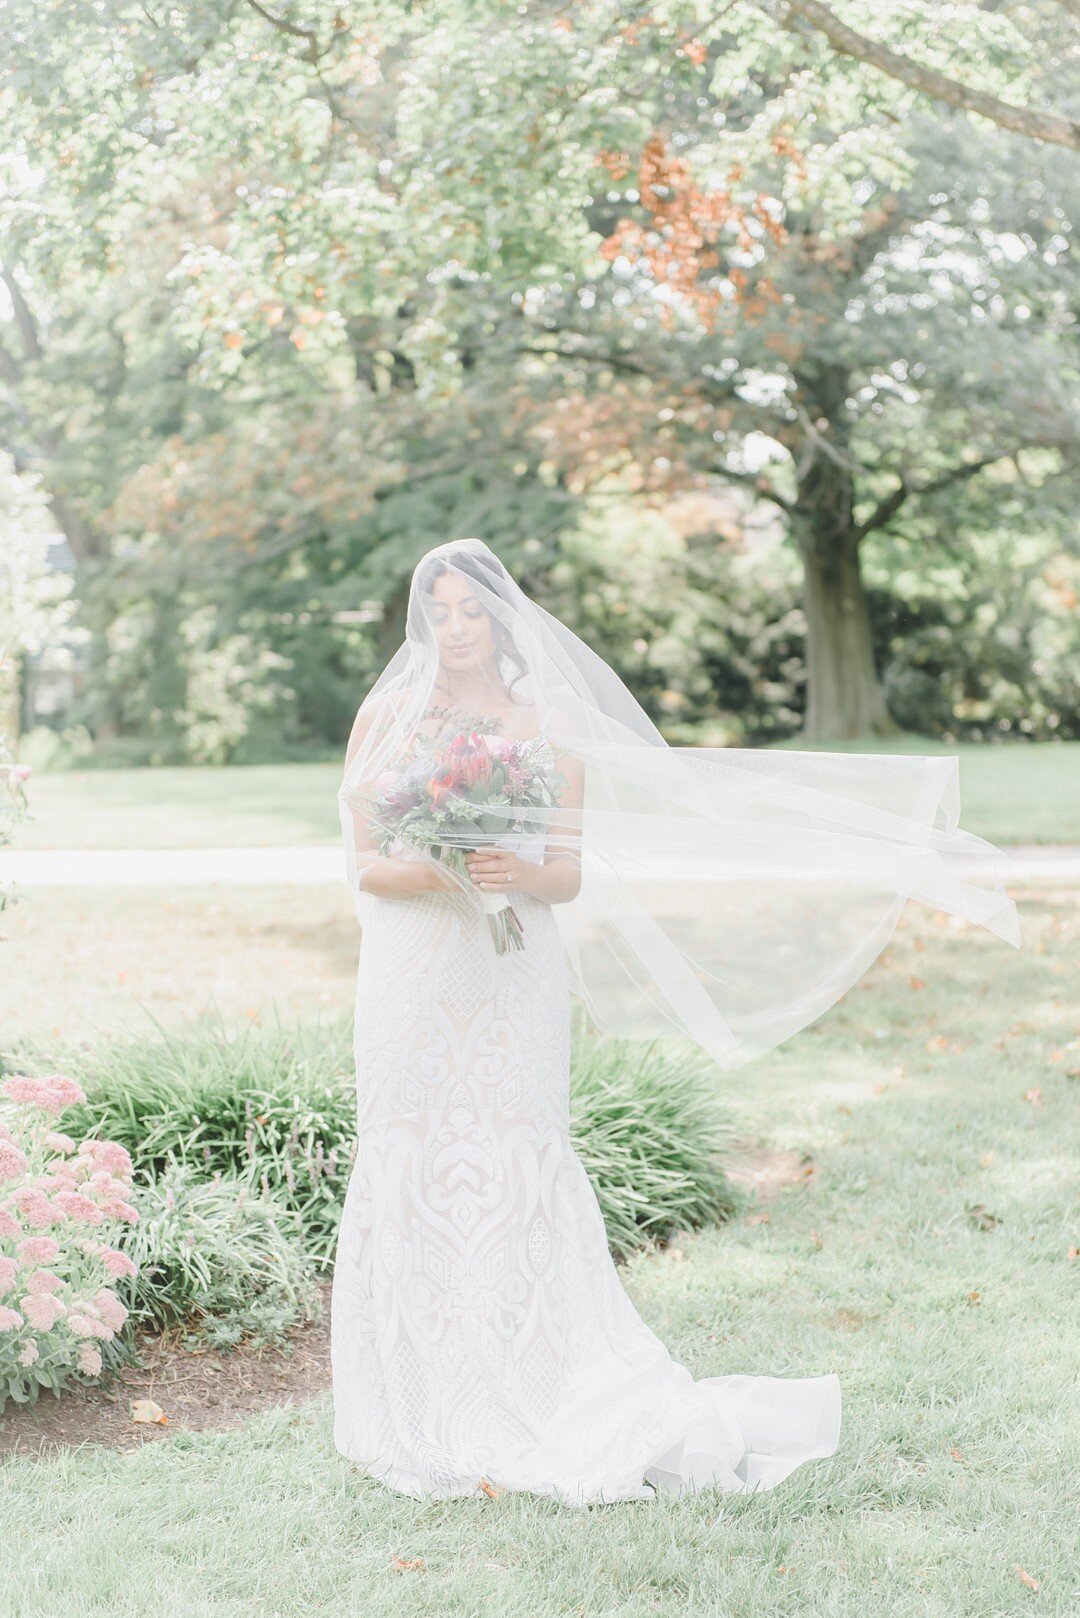 Francesca Michetti Photography captured the bold, bright, fun colors of fall in this inspired wedding styled shoot featuring a feather bouquet and floral headpiece for the bride. Concept and planning by Peonies Events and other Philadelphia wedding …